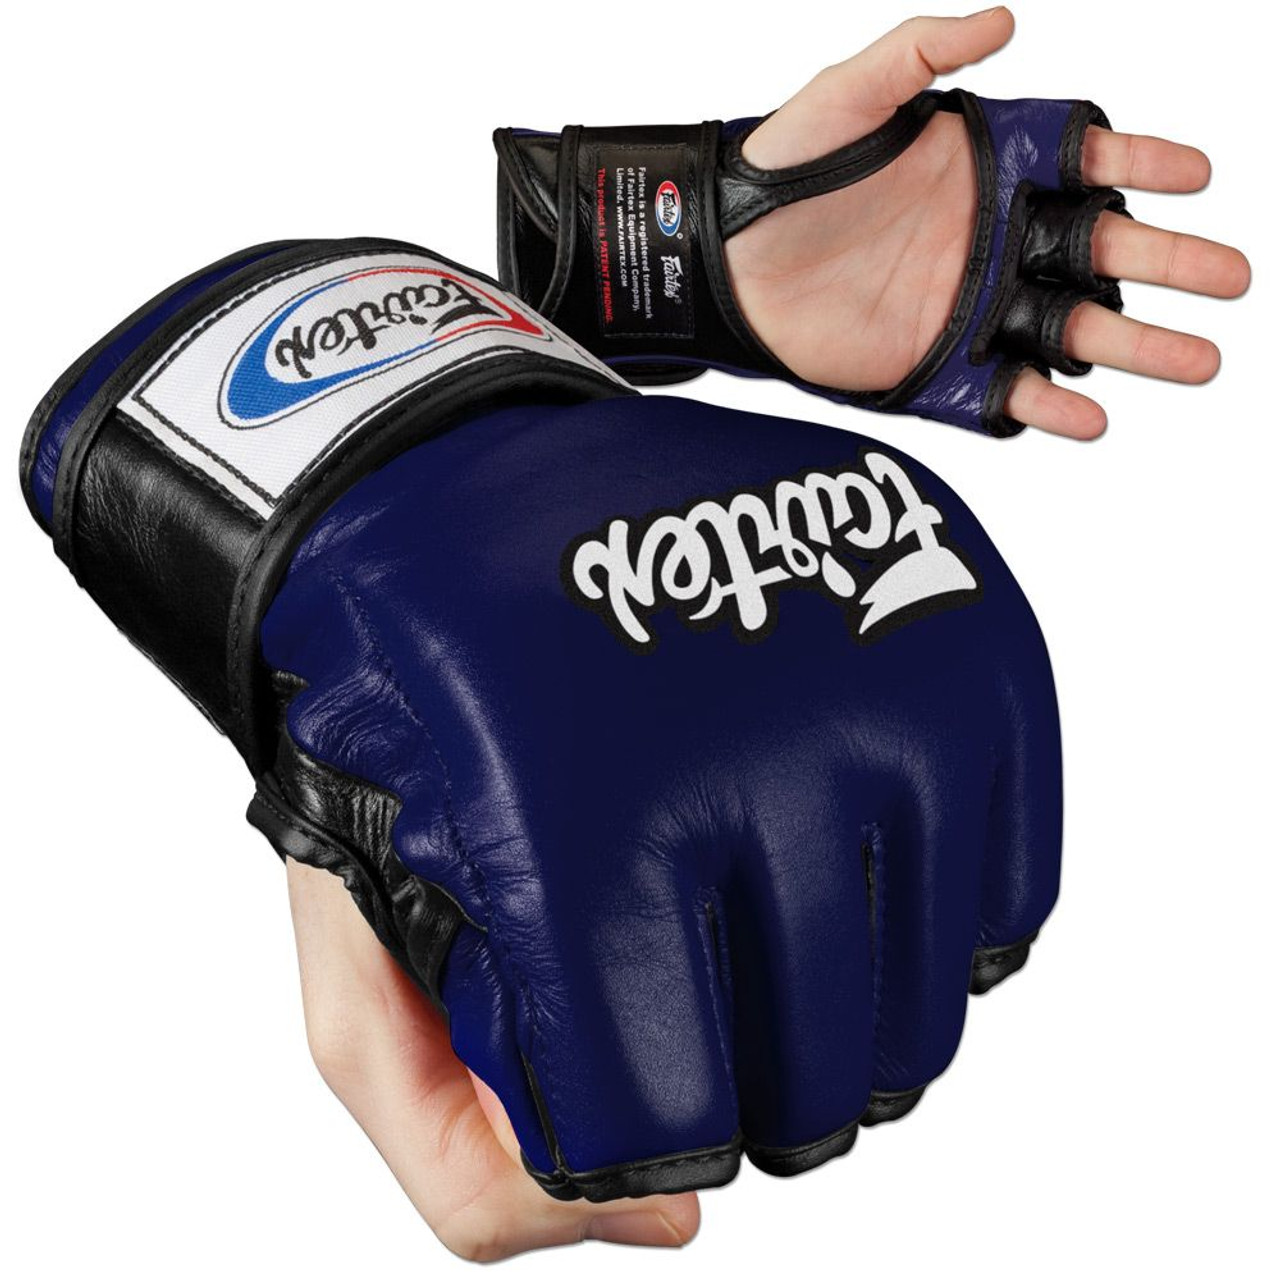 Strike Thumb Protect MMA Training Gloves Fitness Sparring Fight Grappling 